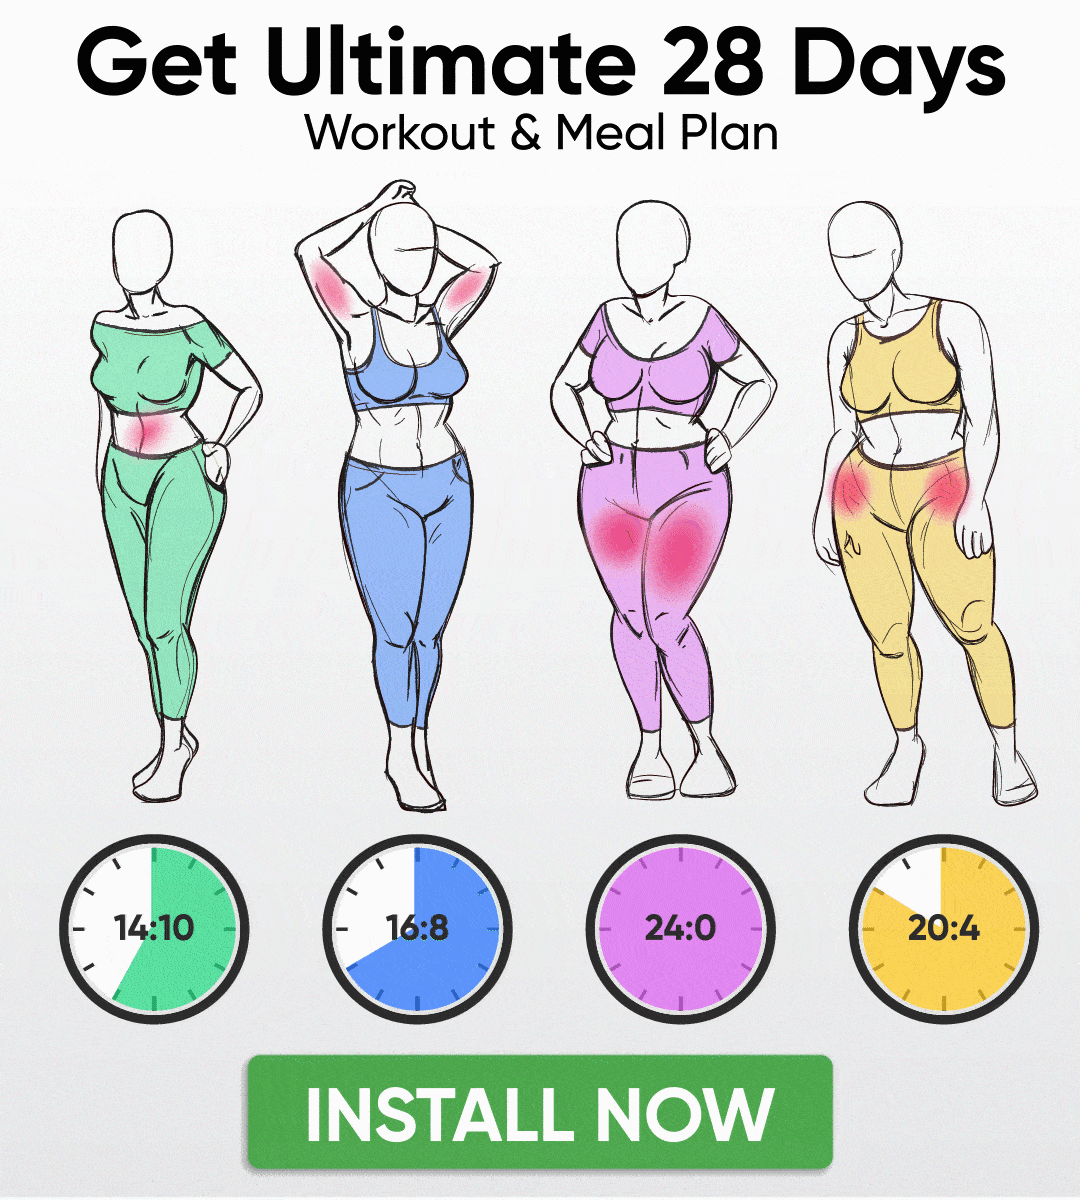 Get Ultimate 28 Days Workout Meal Plan